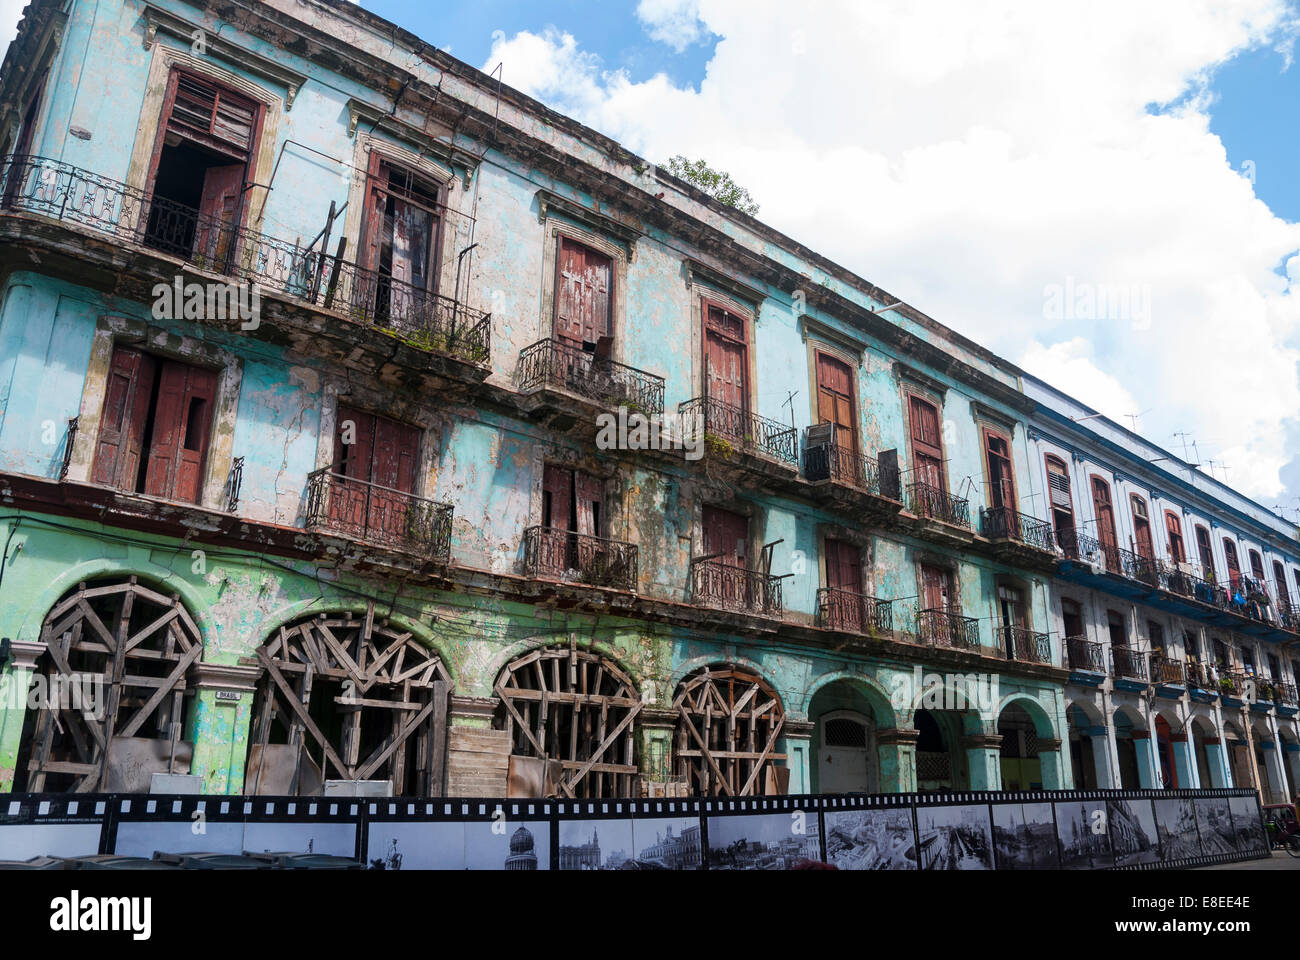 A dilapidated row of apartment buildings some of which are still occupied on a street near the Capital building in Havana Cuba Stock Photo